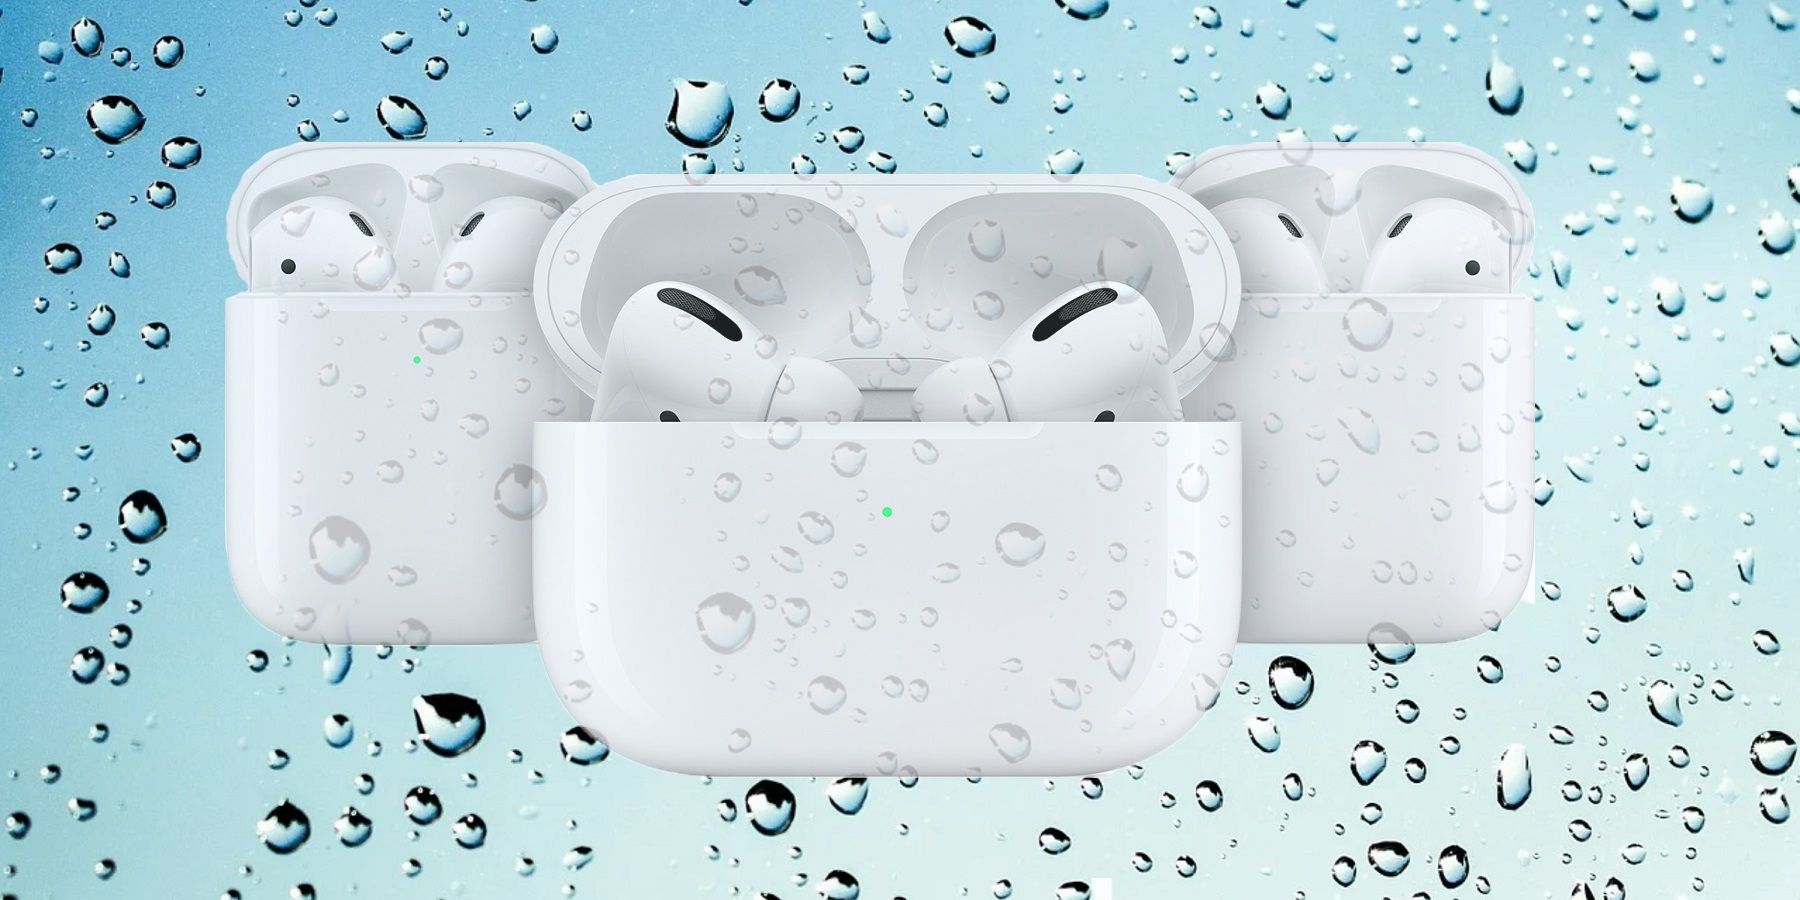 Apple AirPods & Pro Water Resistance Explained What You Can & Cannot Do